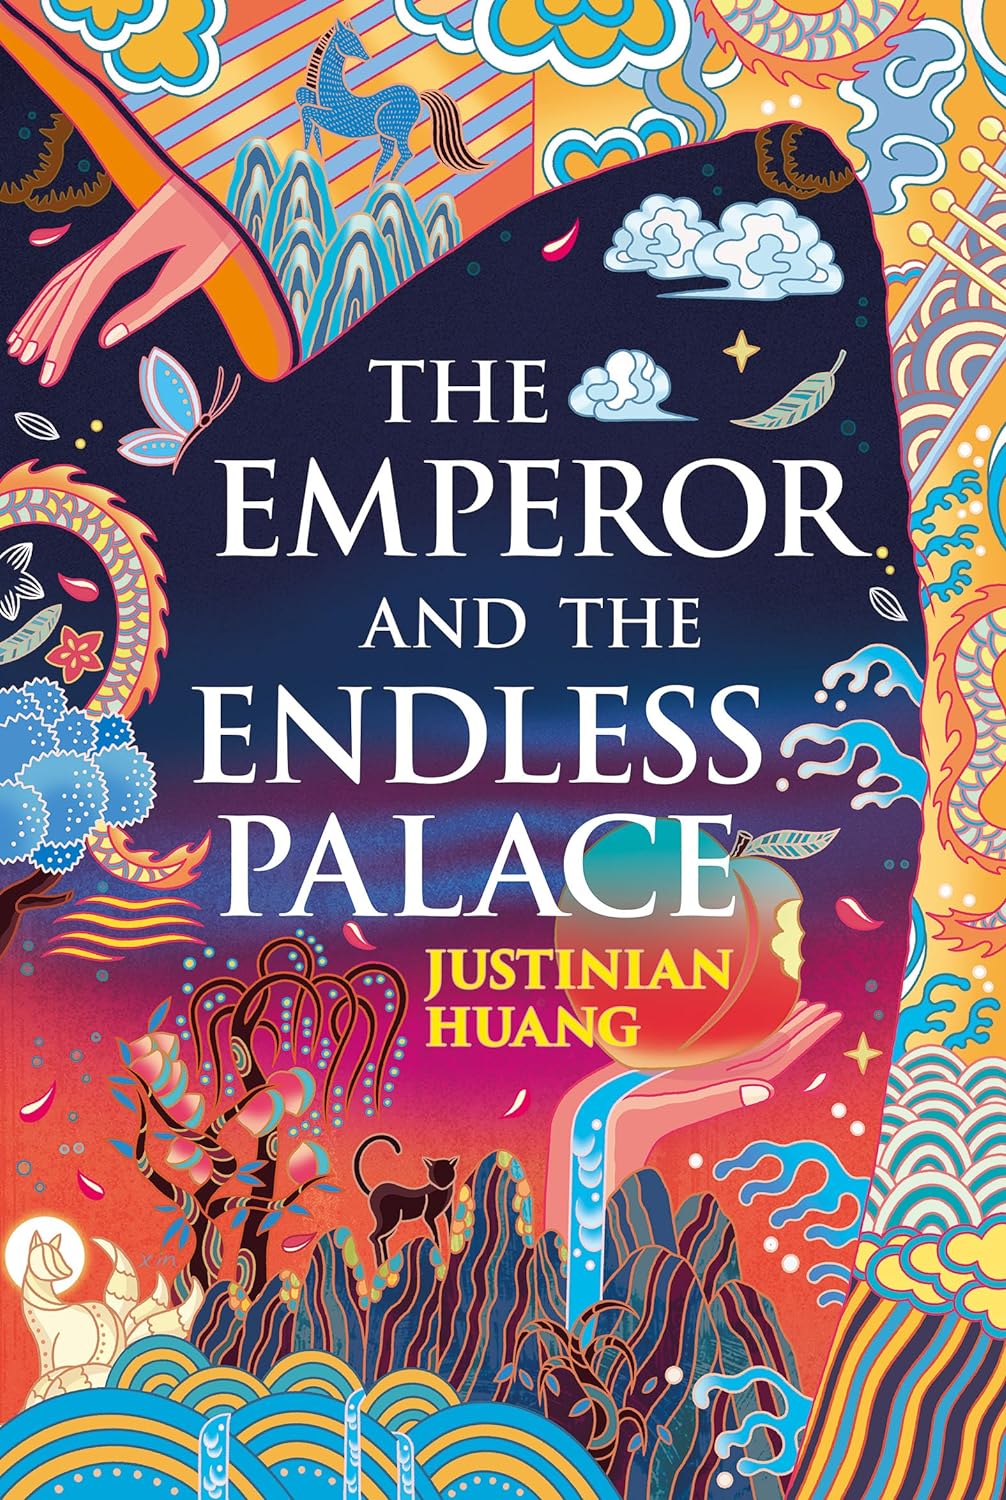 Image for "The Emperor and the Endless Palace"